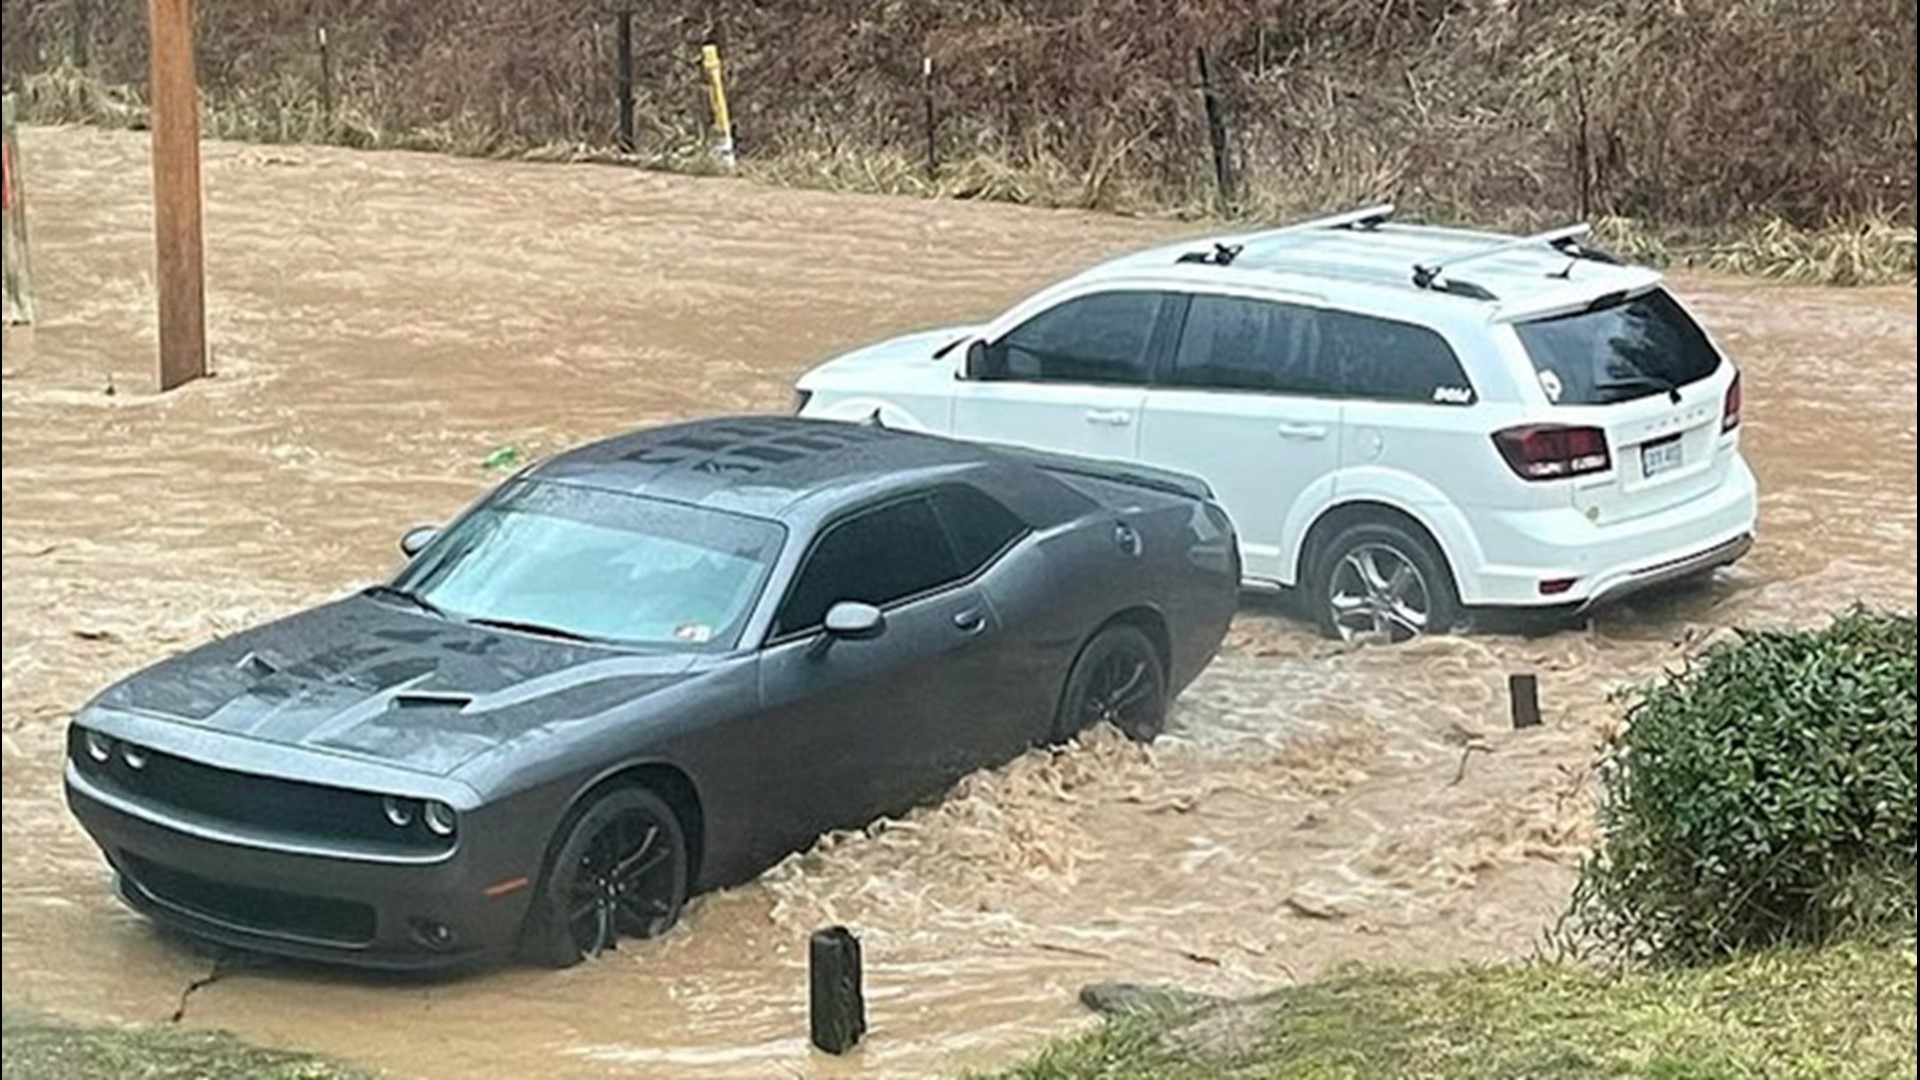 Heavy rain led to flooding in Hurricane, West Virginia, on Feb. 28. If you see flooding like this, remember: turn around, don't drown!